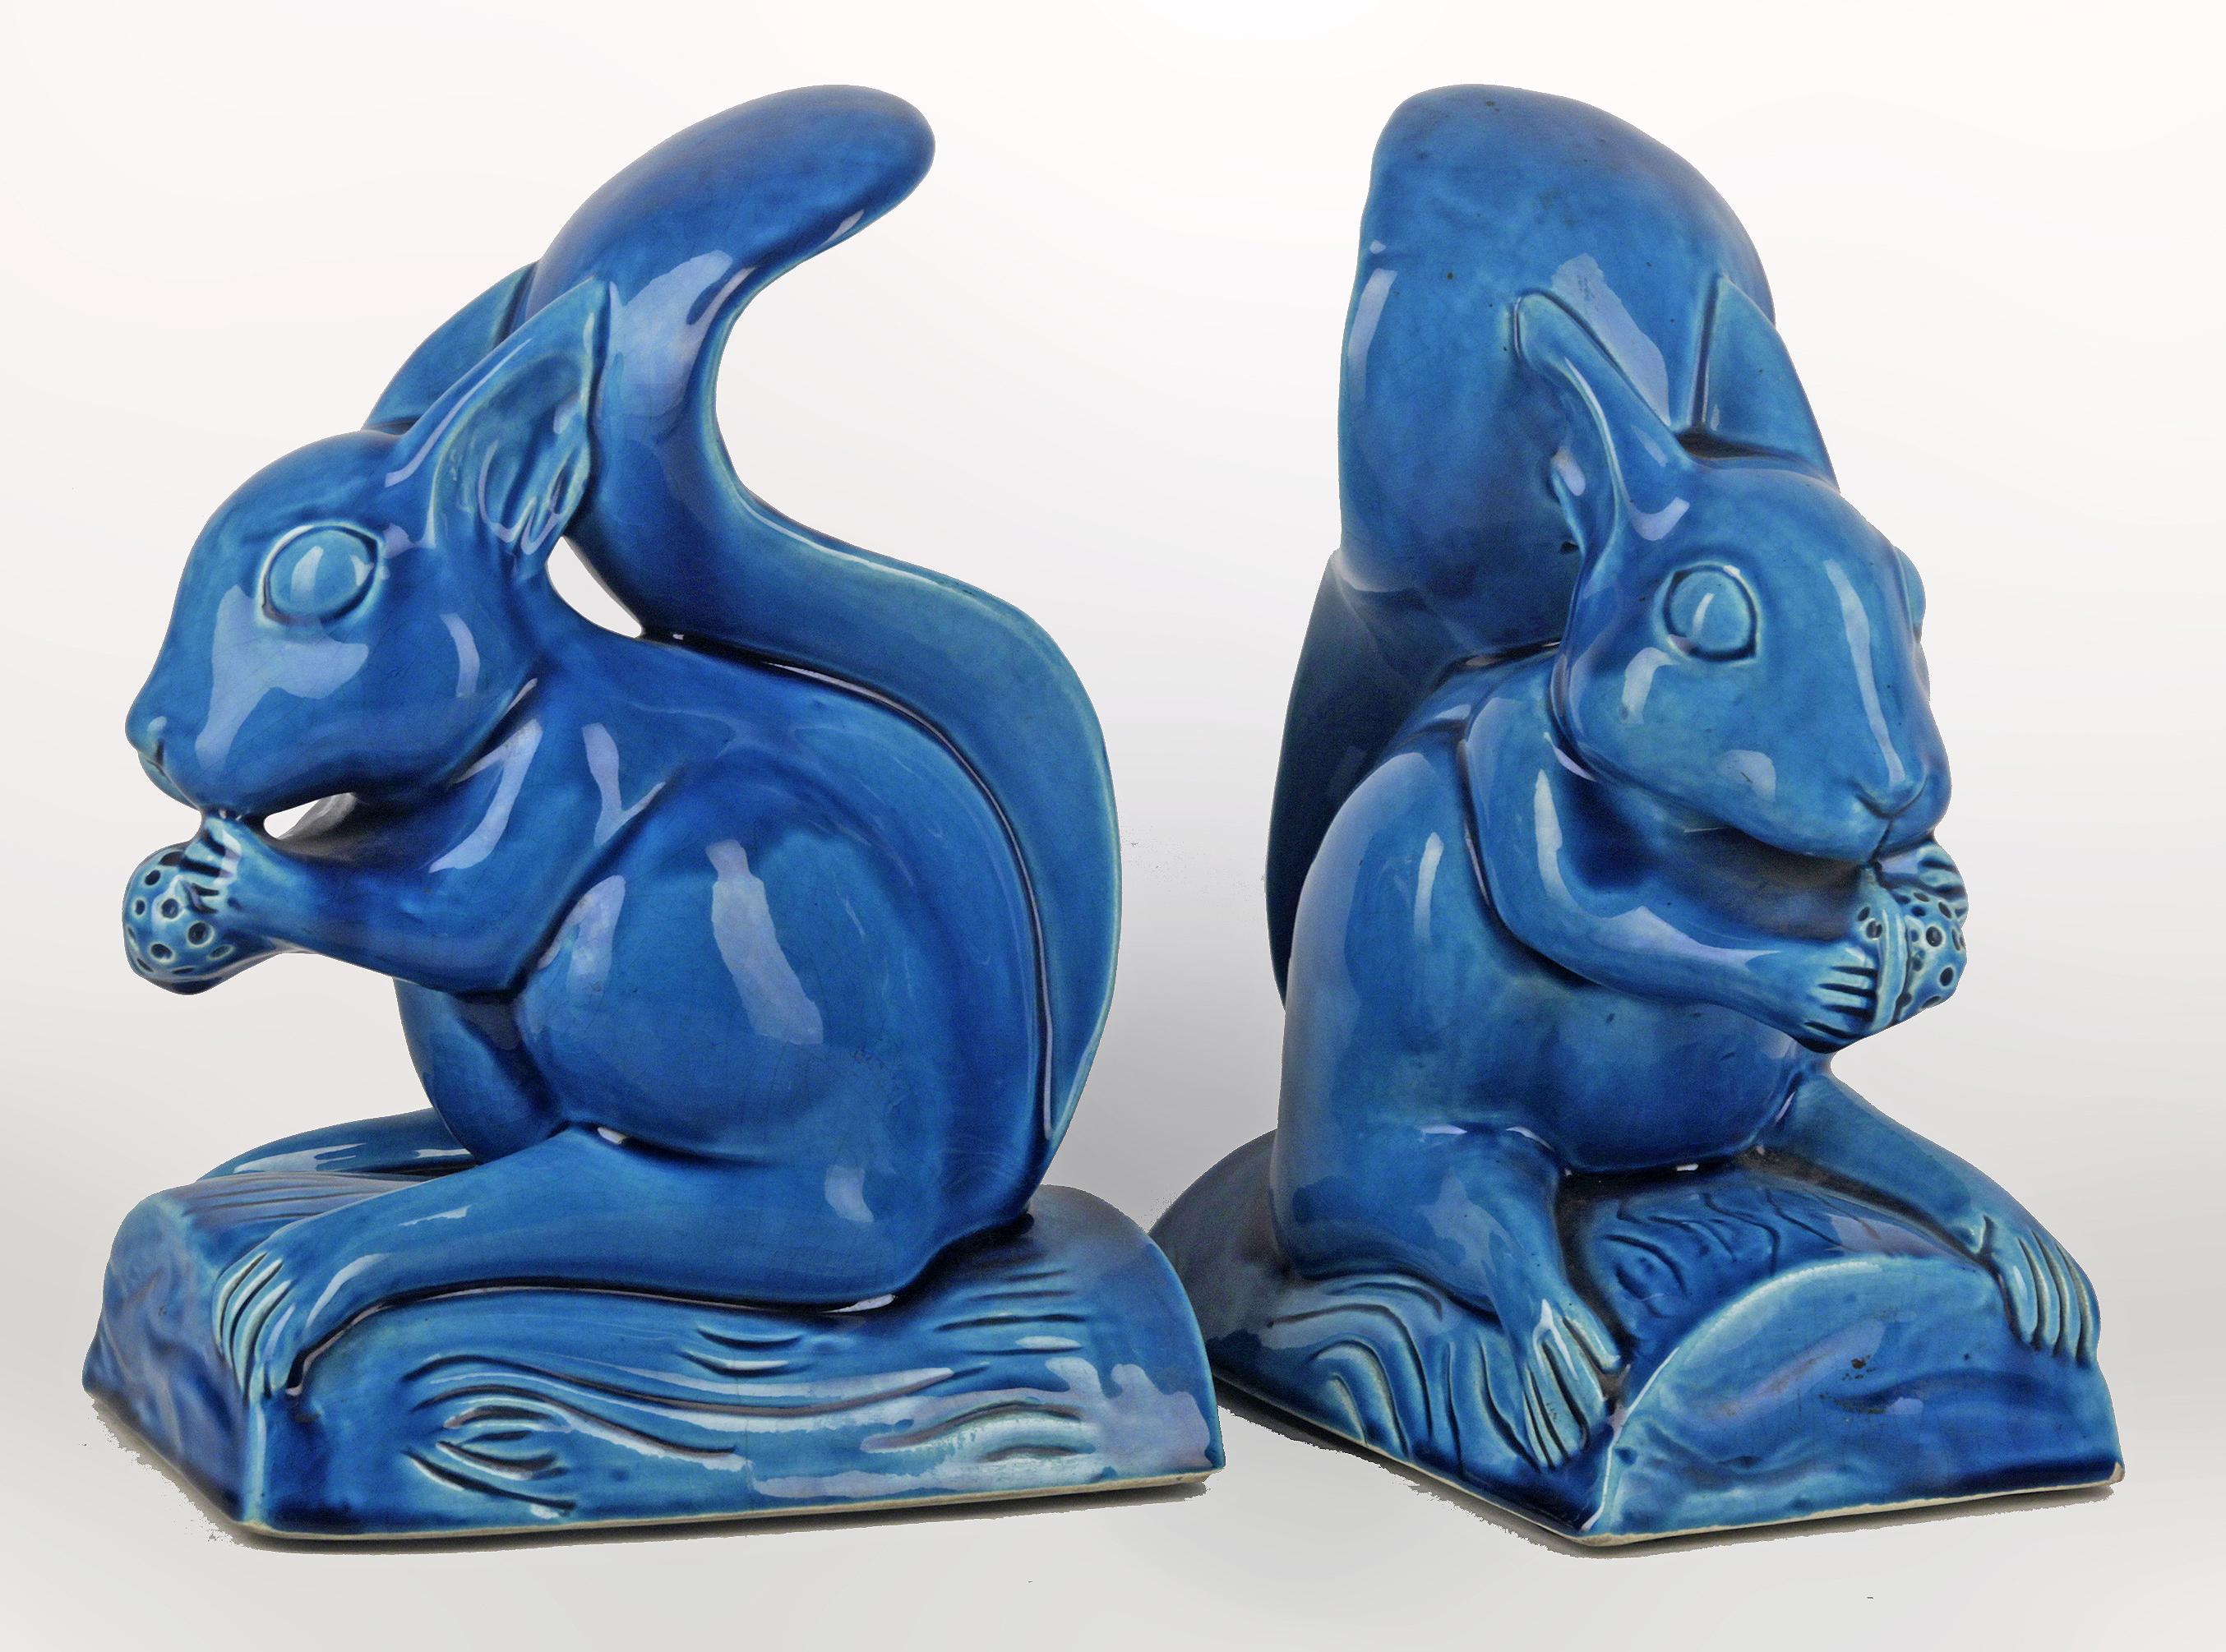 Set of mid-20th century chinese glazed blue ceramic squirrel sculptures/bookends

By: unknown
Material: ceramic, paint
Technique: pressed, molded, painted, hand-painted, enameled, glazed
Dimensions: 8 in x 5.5 in x 12 in
Date: mid-20th century,